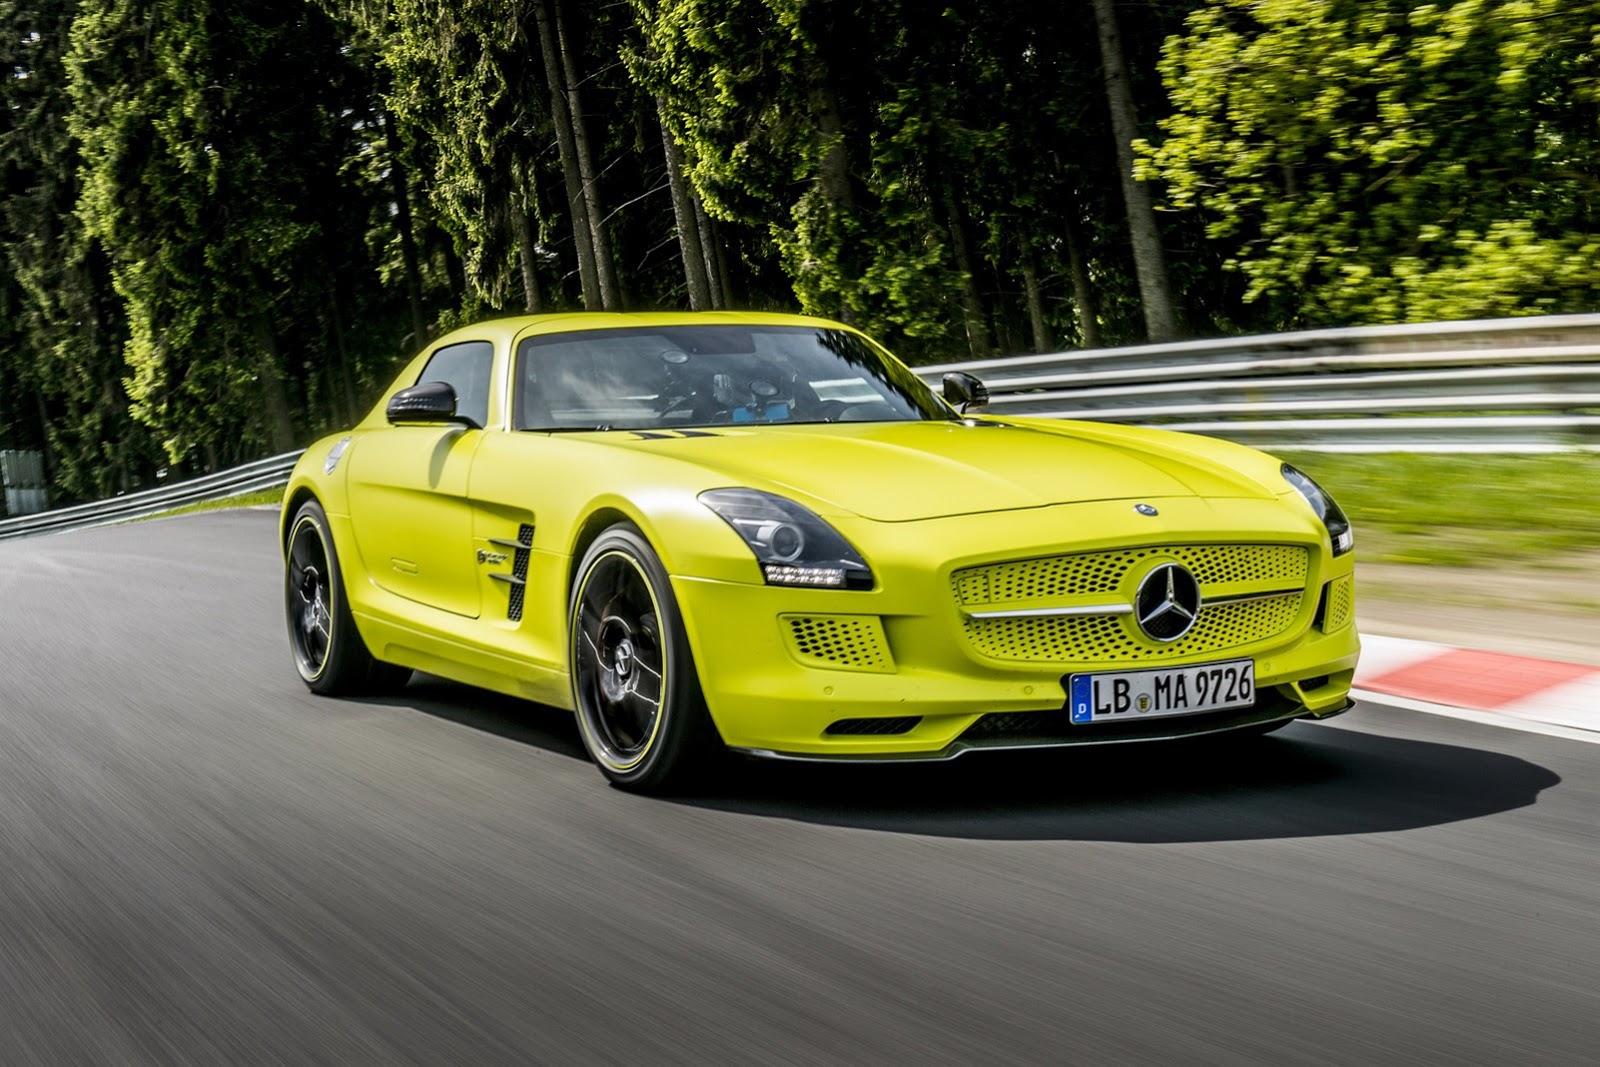 New Nürburgring Lap Record For Electric Car Set By SLS AMG